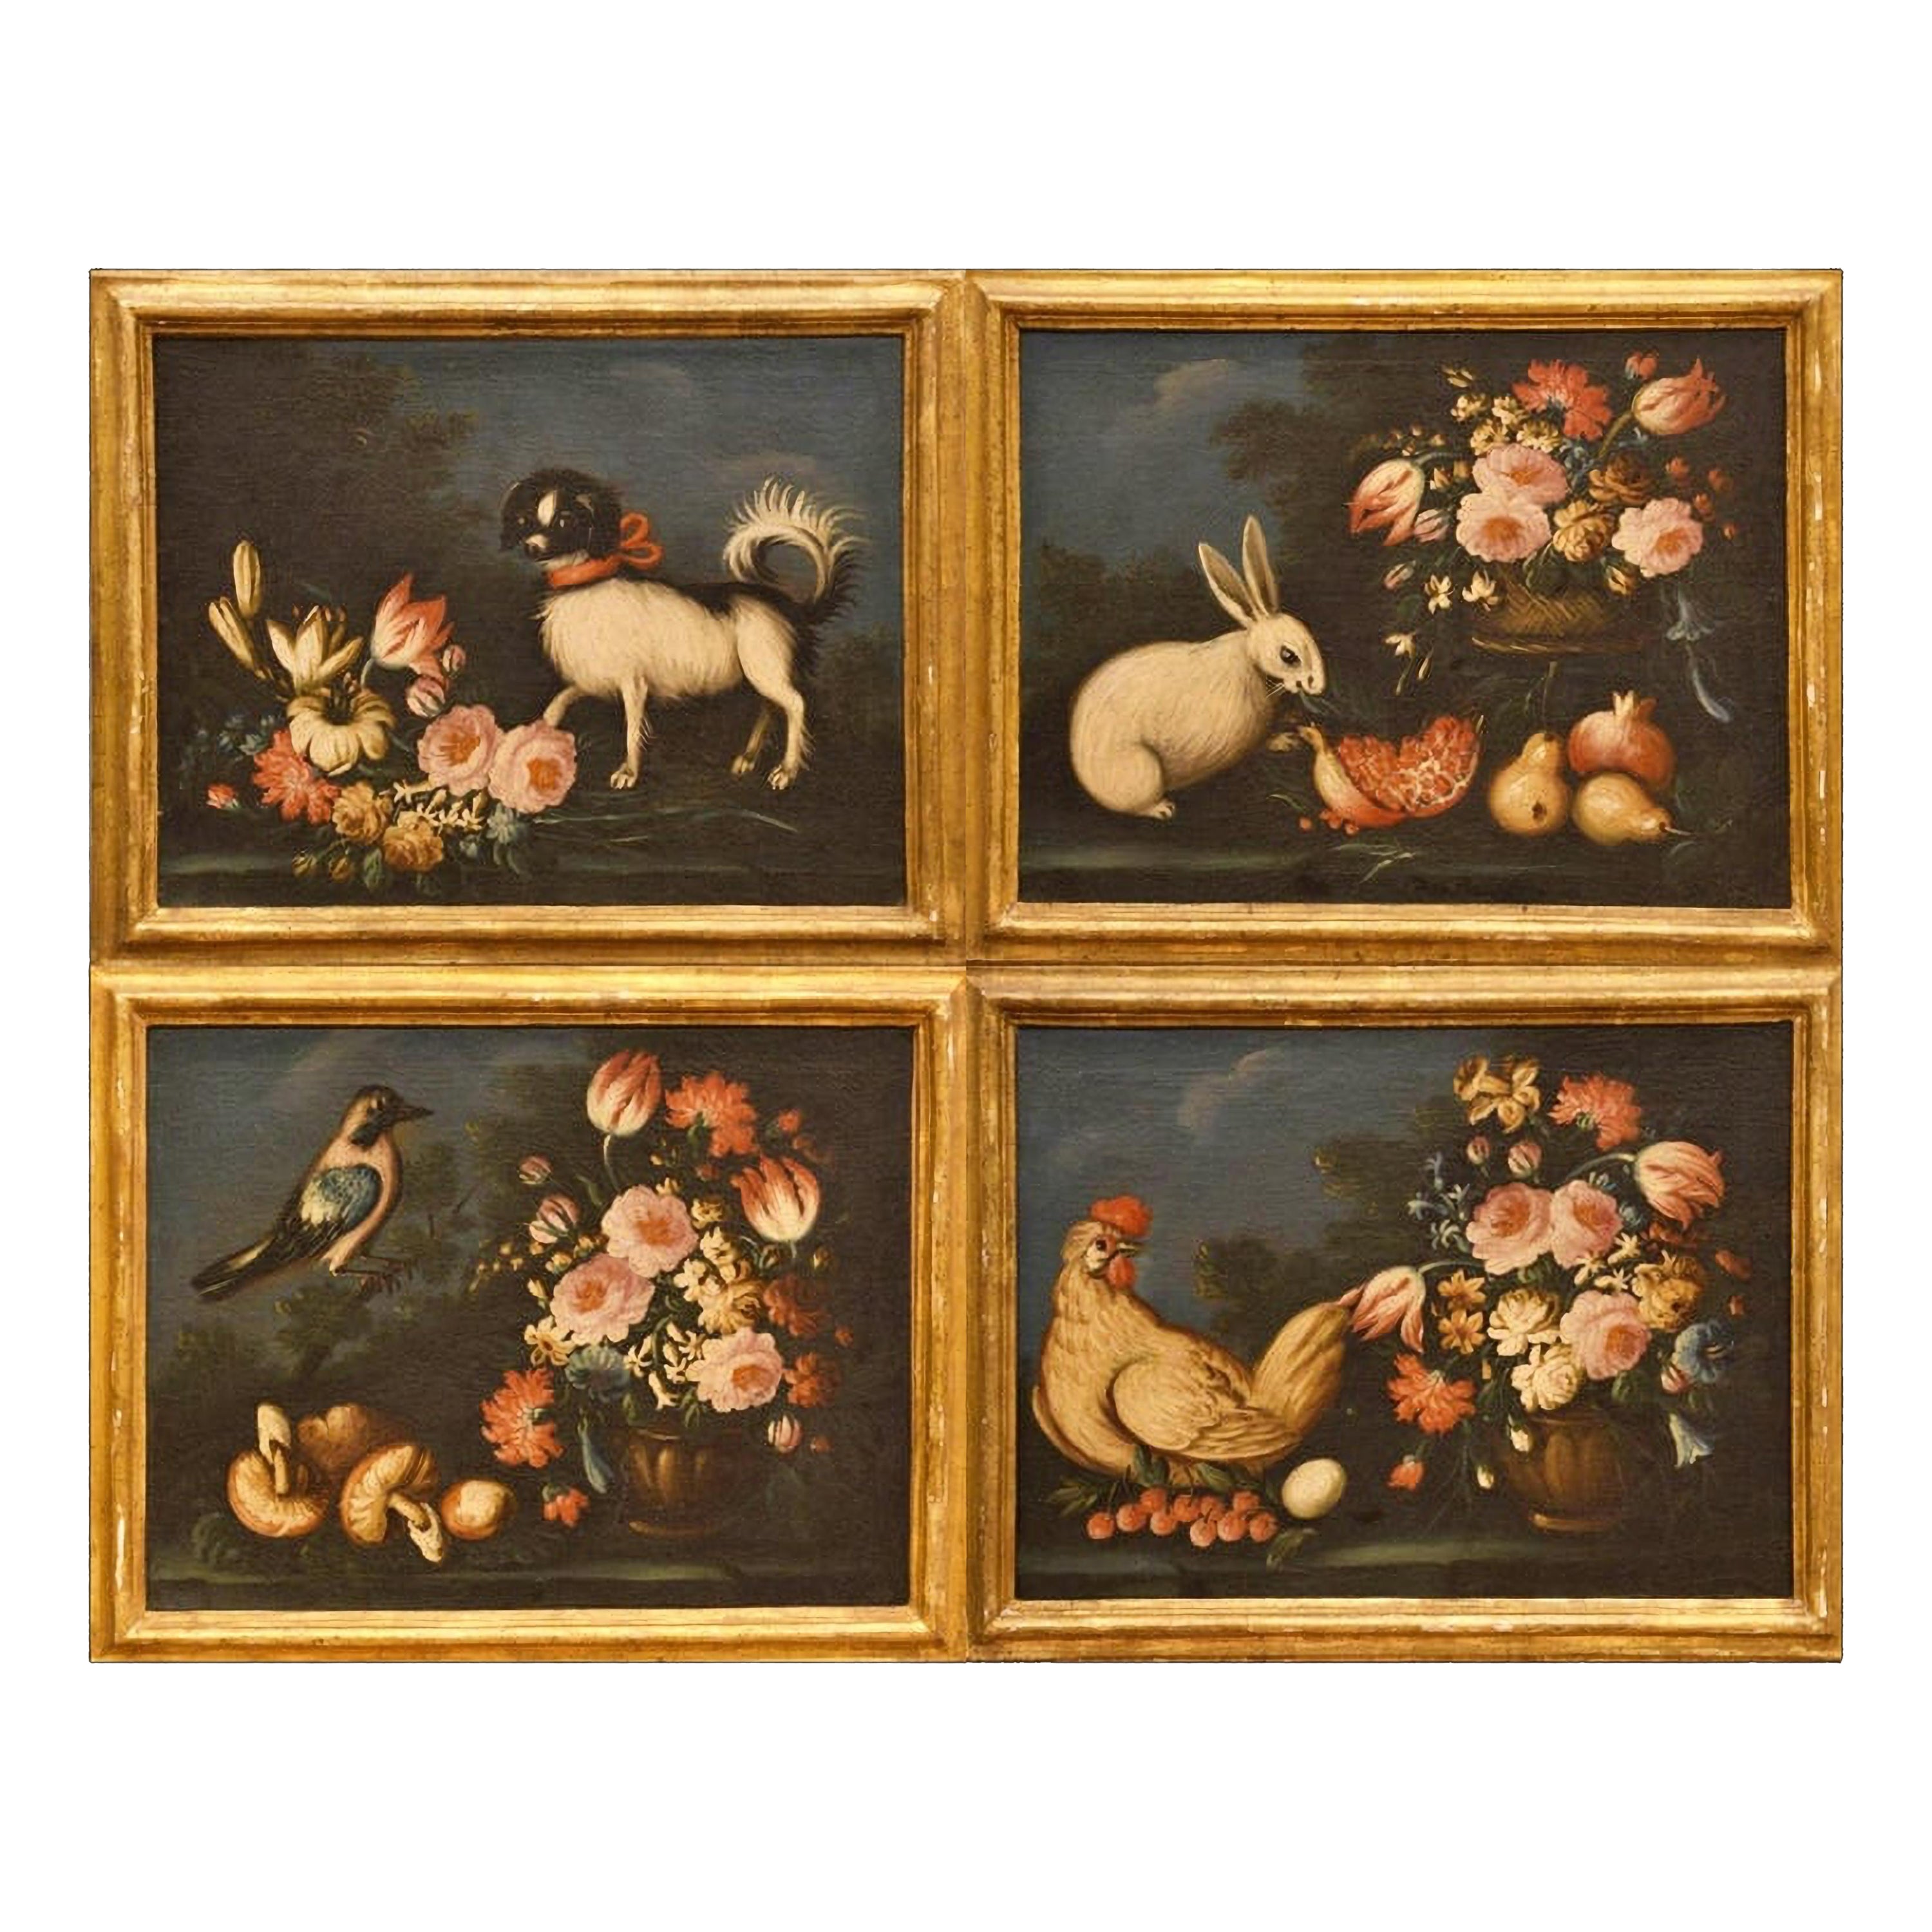 Emilian School - Italy 17th Century "Four Still Lifes with Animals and Flowers" For Sale